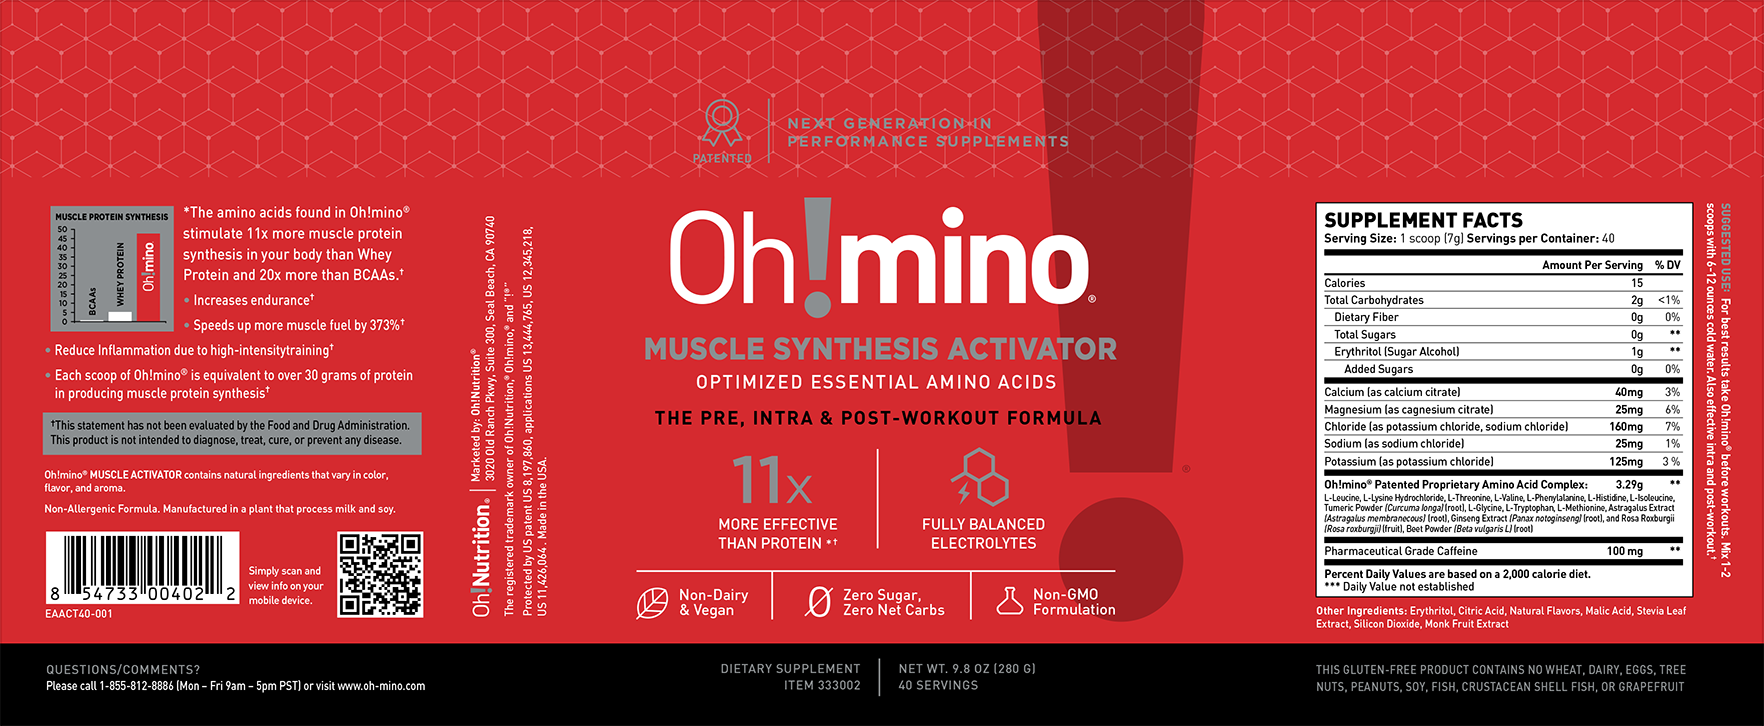 The Oh!mino Muscle Synthesis Activator - PowerBuy